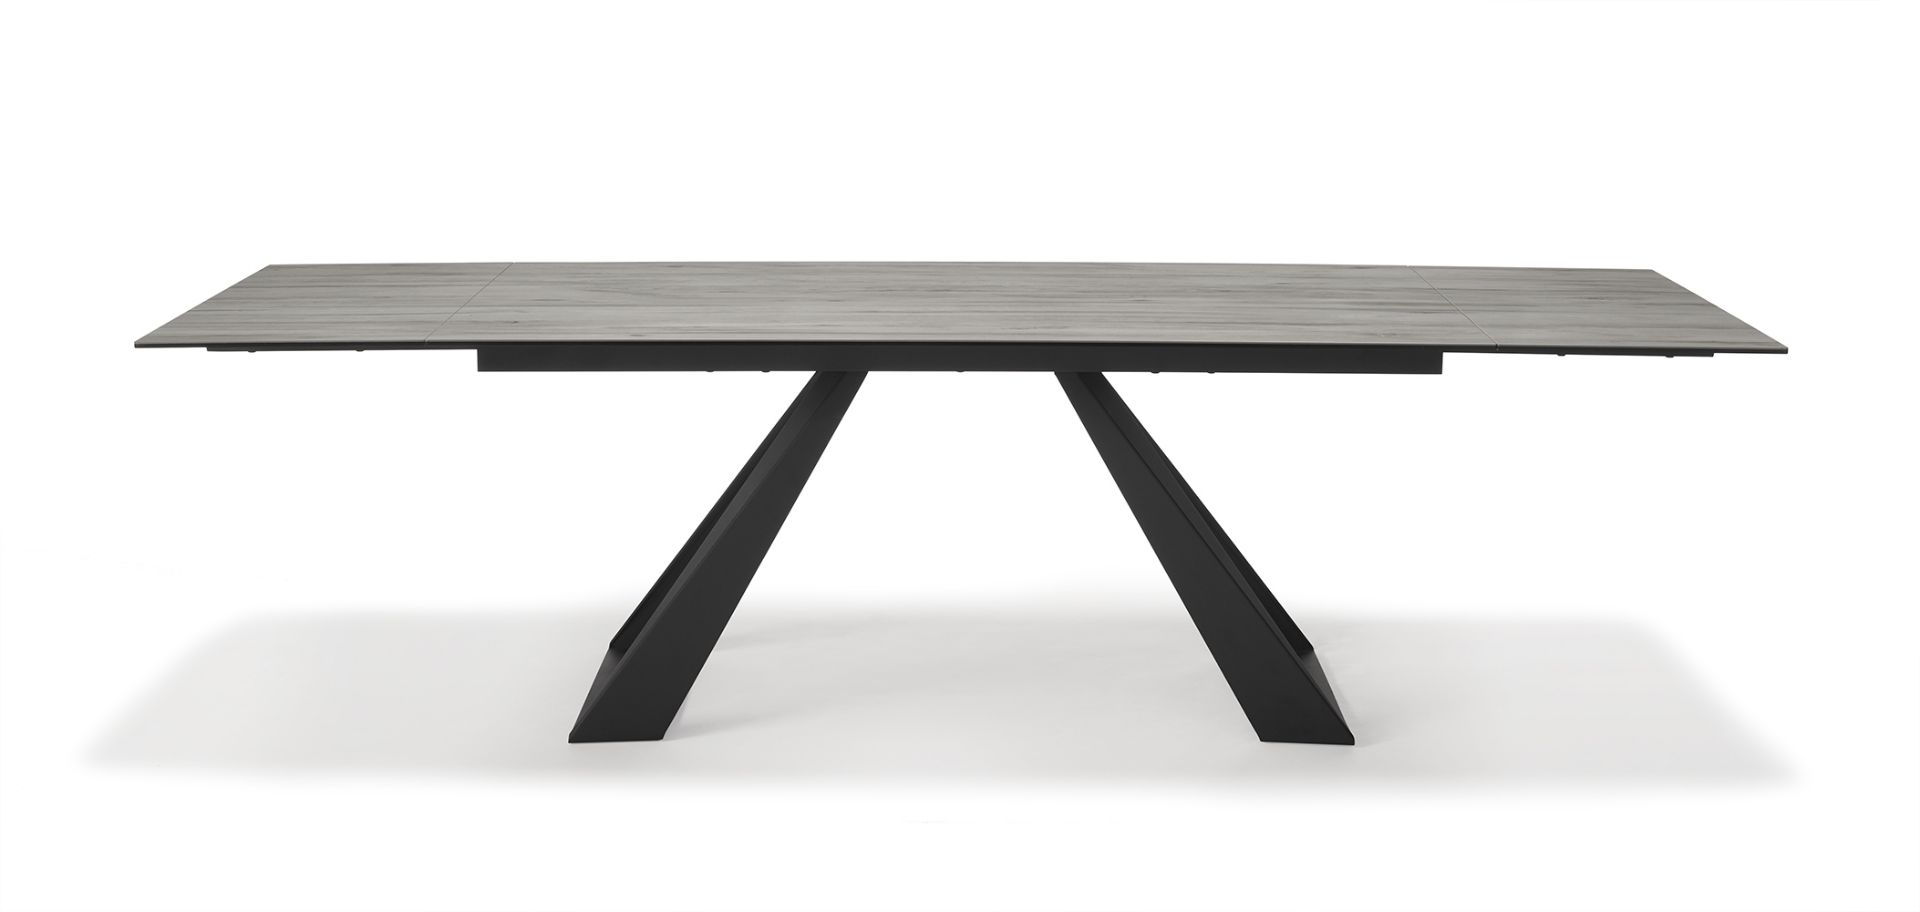 Spartan Dining Table by Kesterport The Spartan Dining Table is part of a sophisticated collection of - Bild 2 aus 12